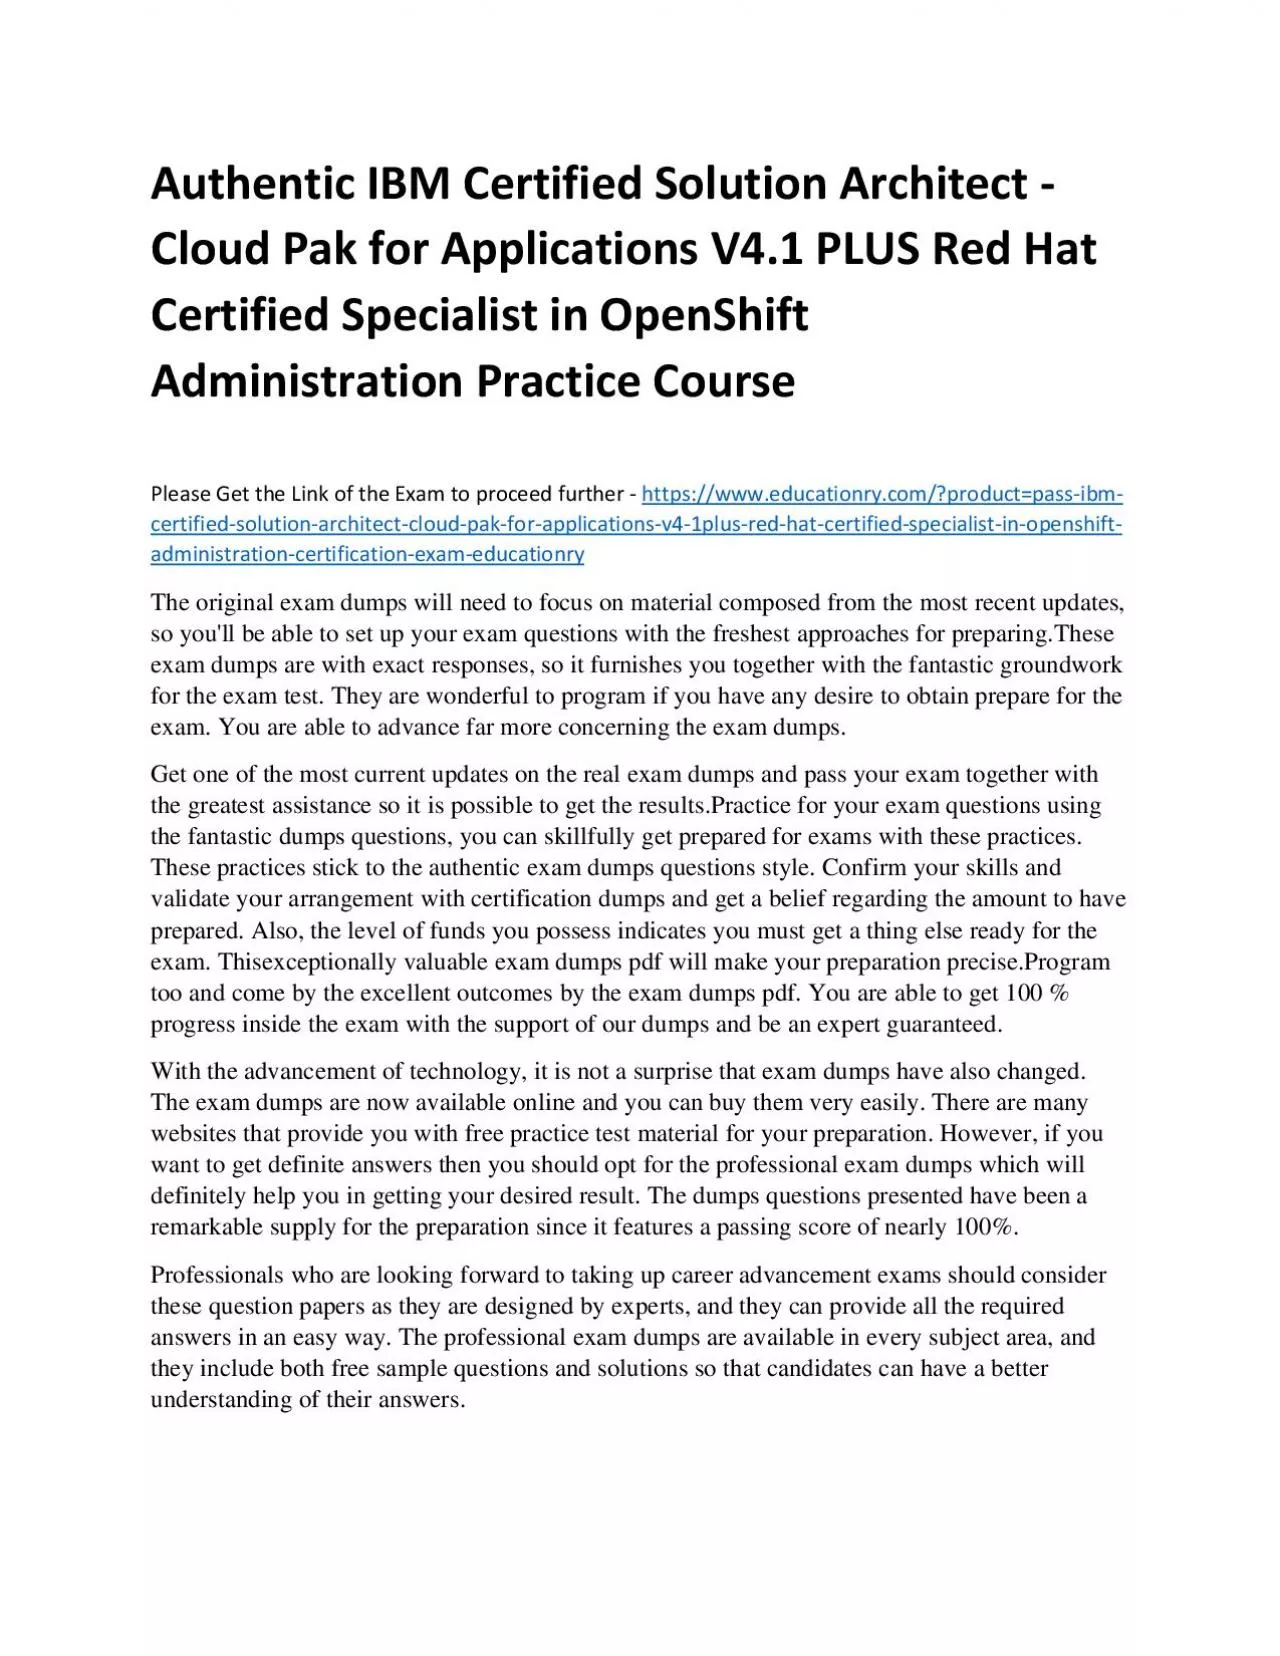 C0006400: IBM Certified Solution Architect - Cloud Pak for Applications V4.1 PLUS Red